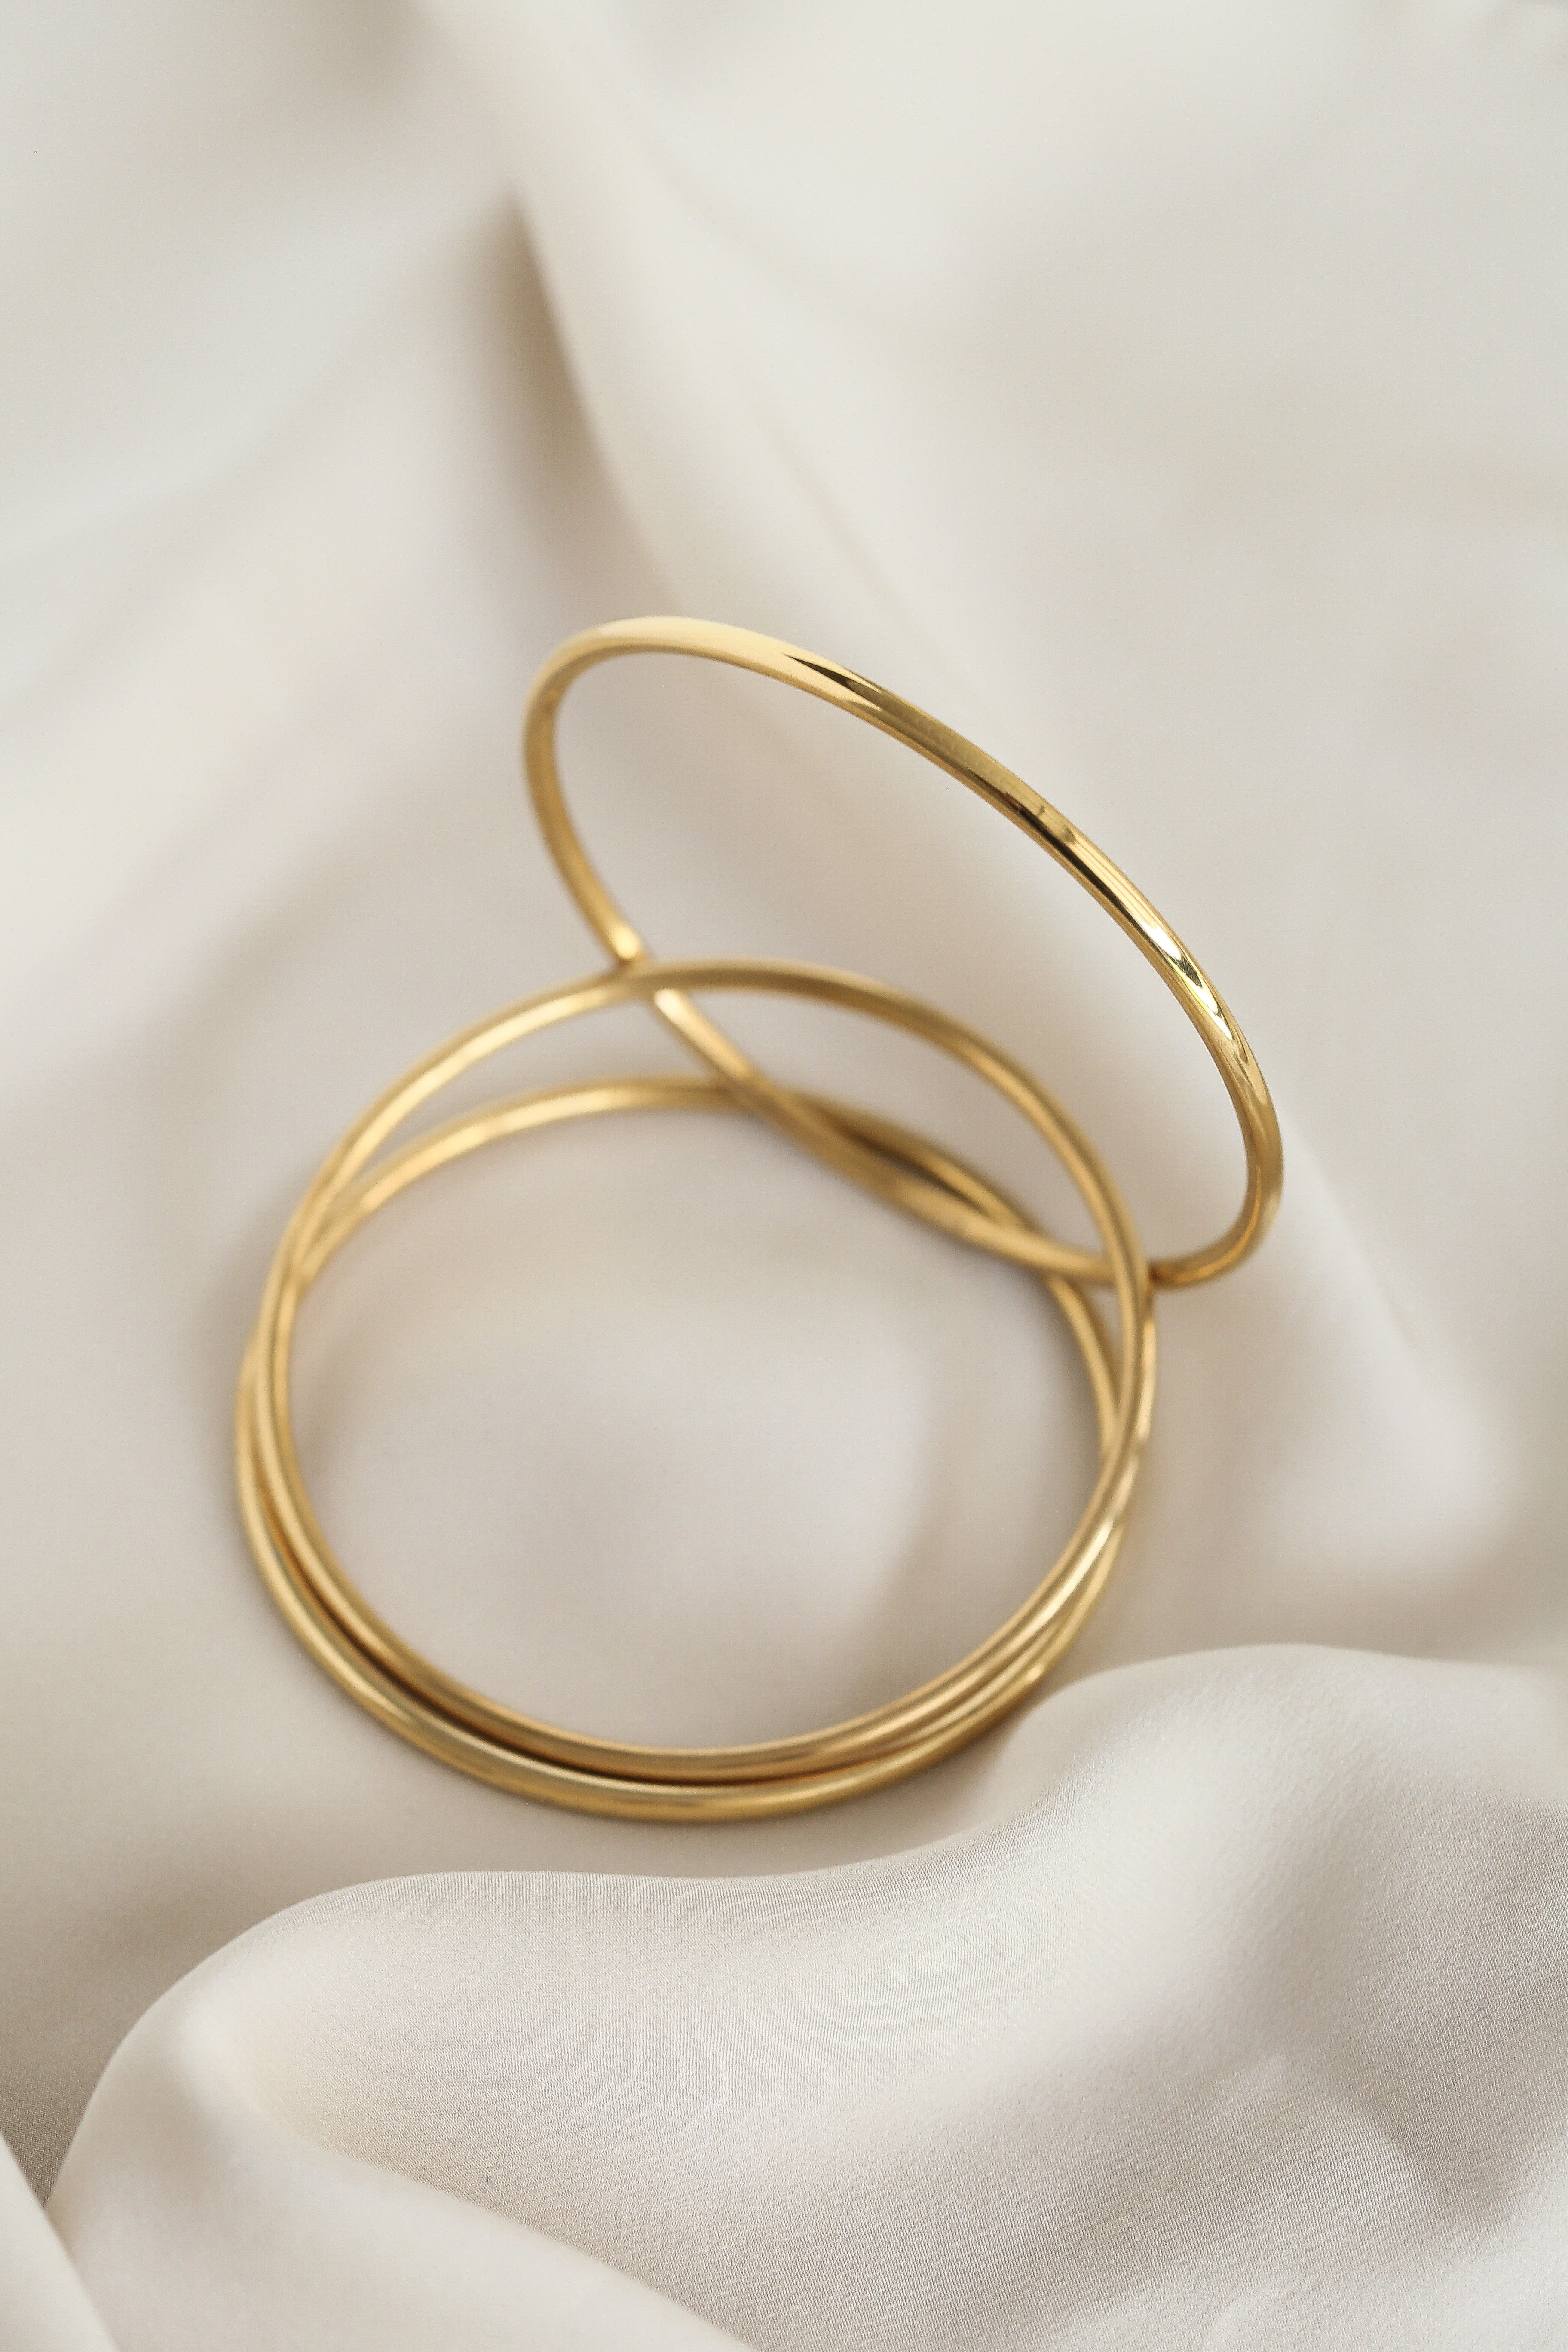 Lola Bangles - Boutique Minimaliste has waterproof, durable, elegant and vintage inspired jewelry